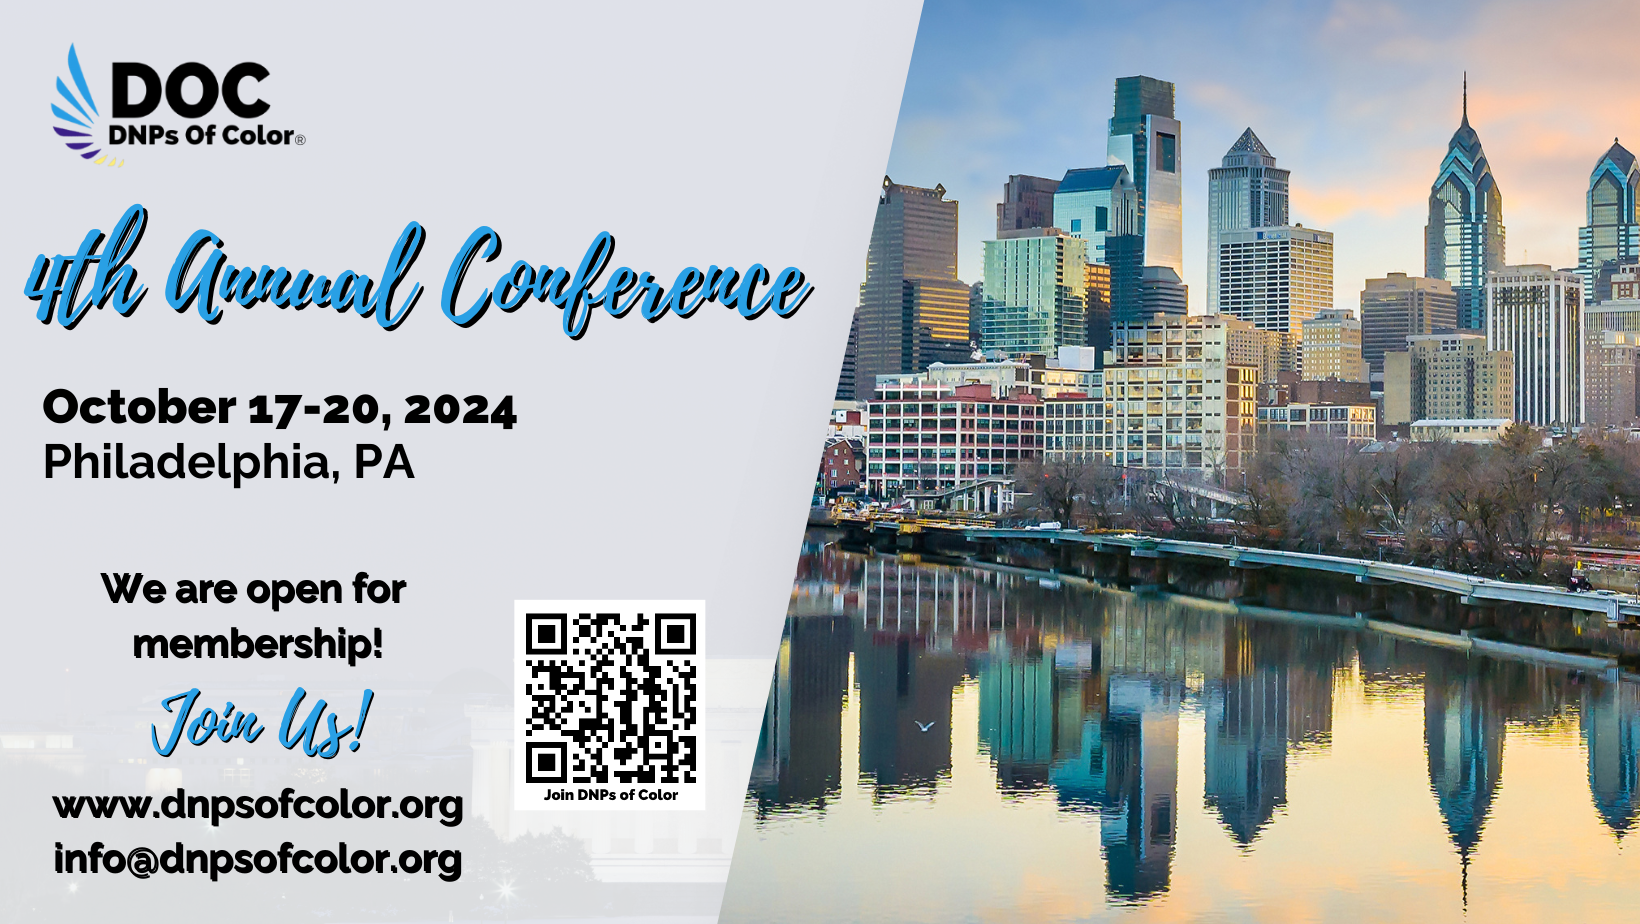 game changers and trailblazers save the date for the 2023 DNPs of Color Annual Conference Oct 19 - 22 2023